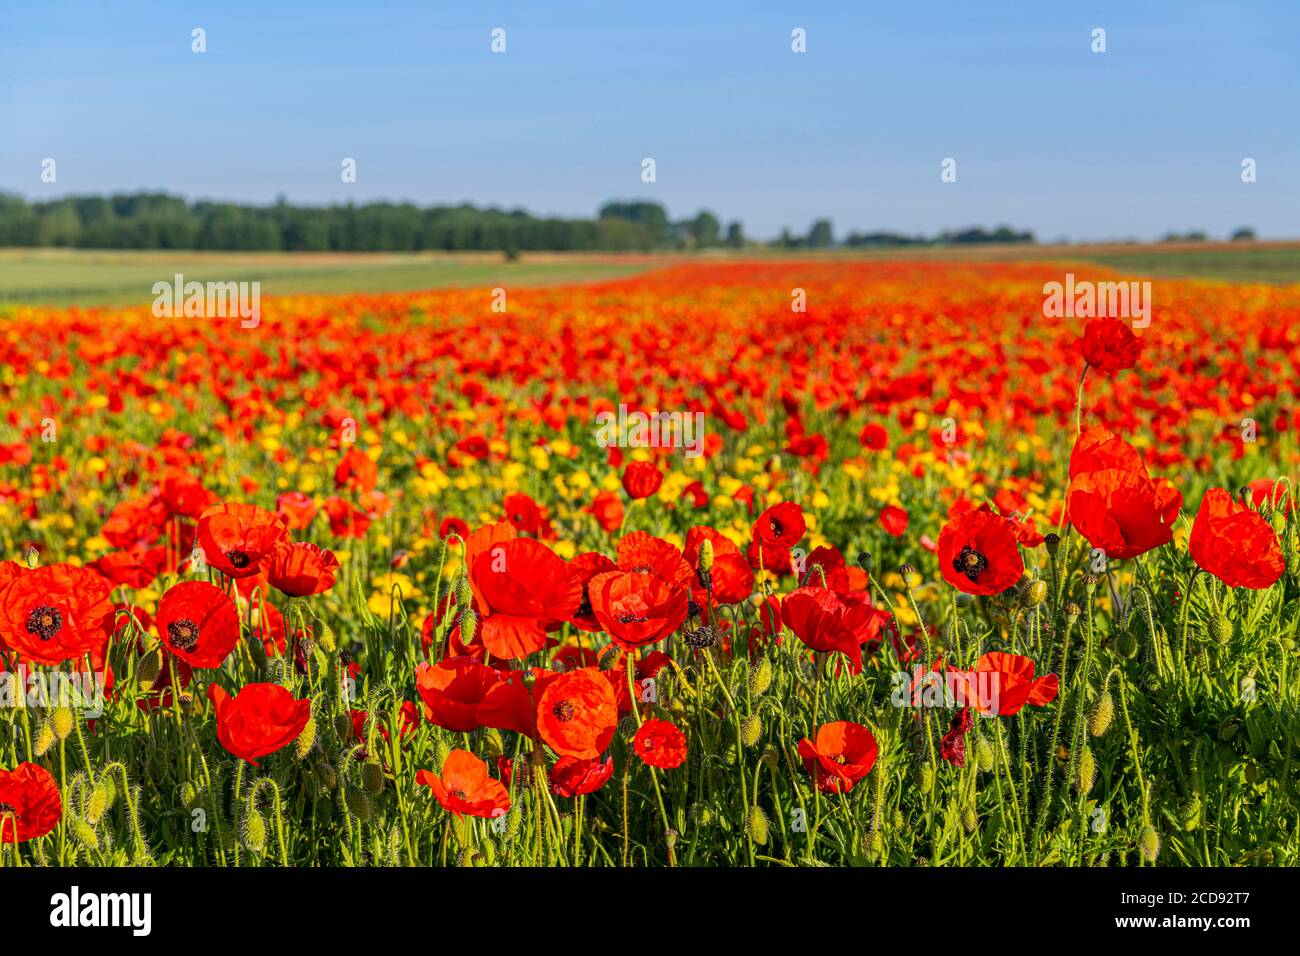 France, Somme, Bay of the Somme, Saint-Valery-sur-Somme, The fields of poppies between Saint-Valery-sur-Somme and Pend? have become a real tourist attraction and many people come to photograph there Stock Photo